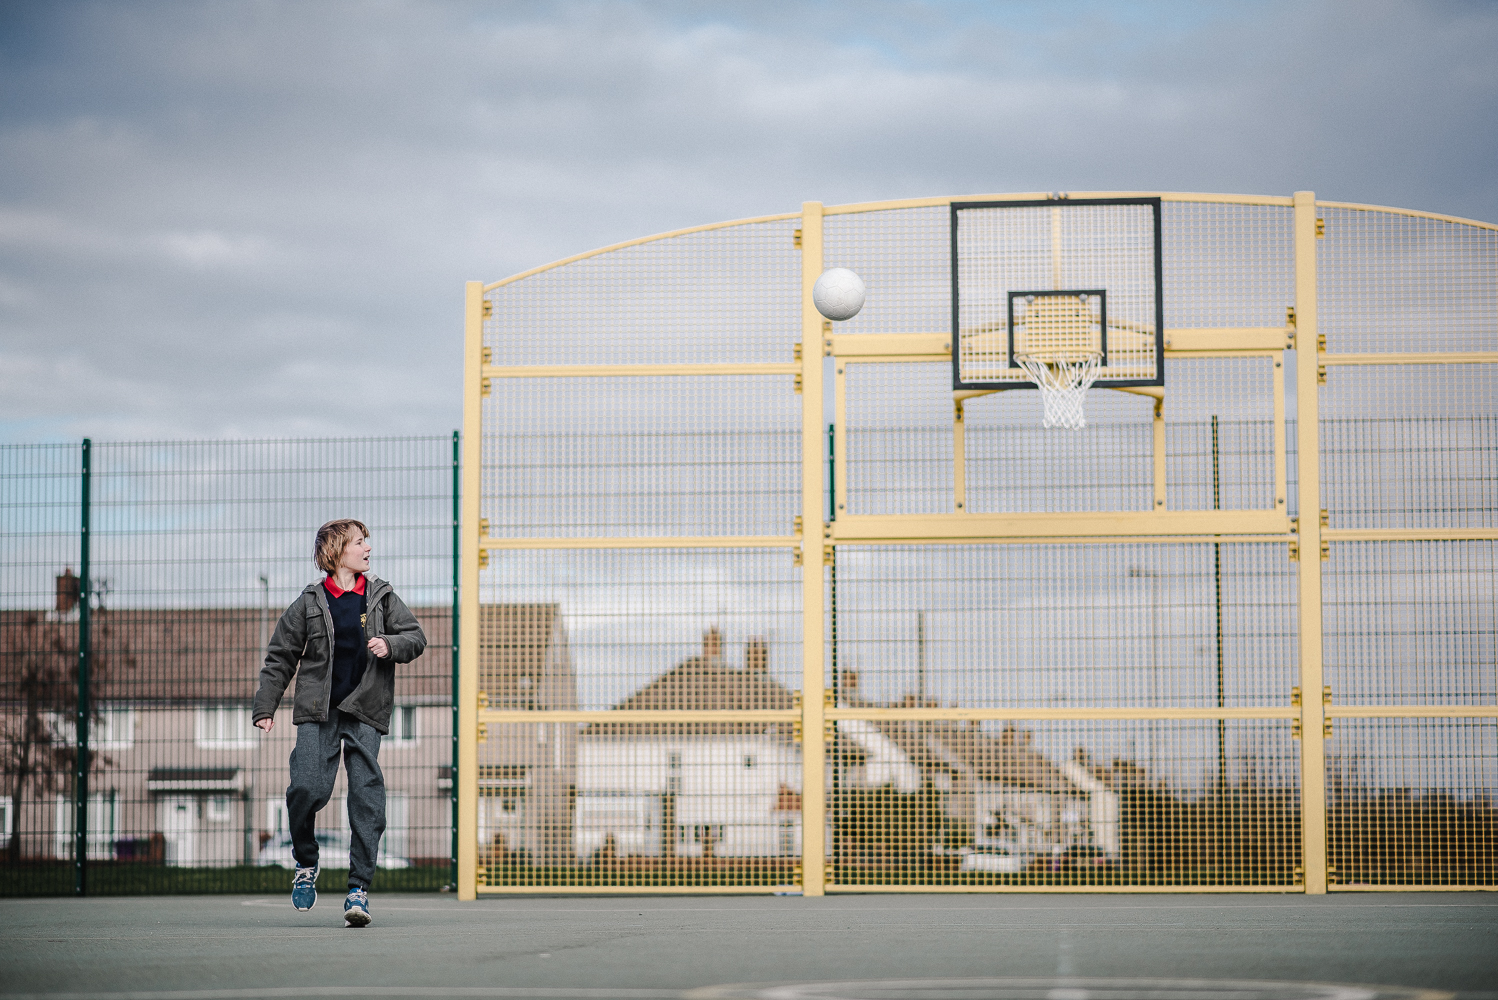 Young person on a basketball court